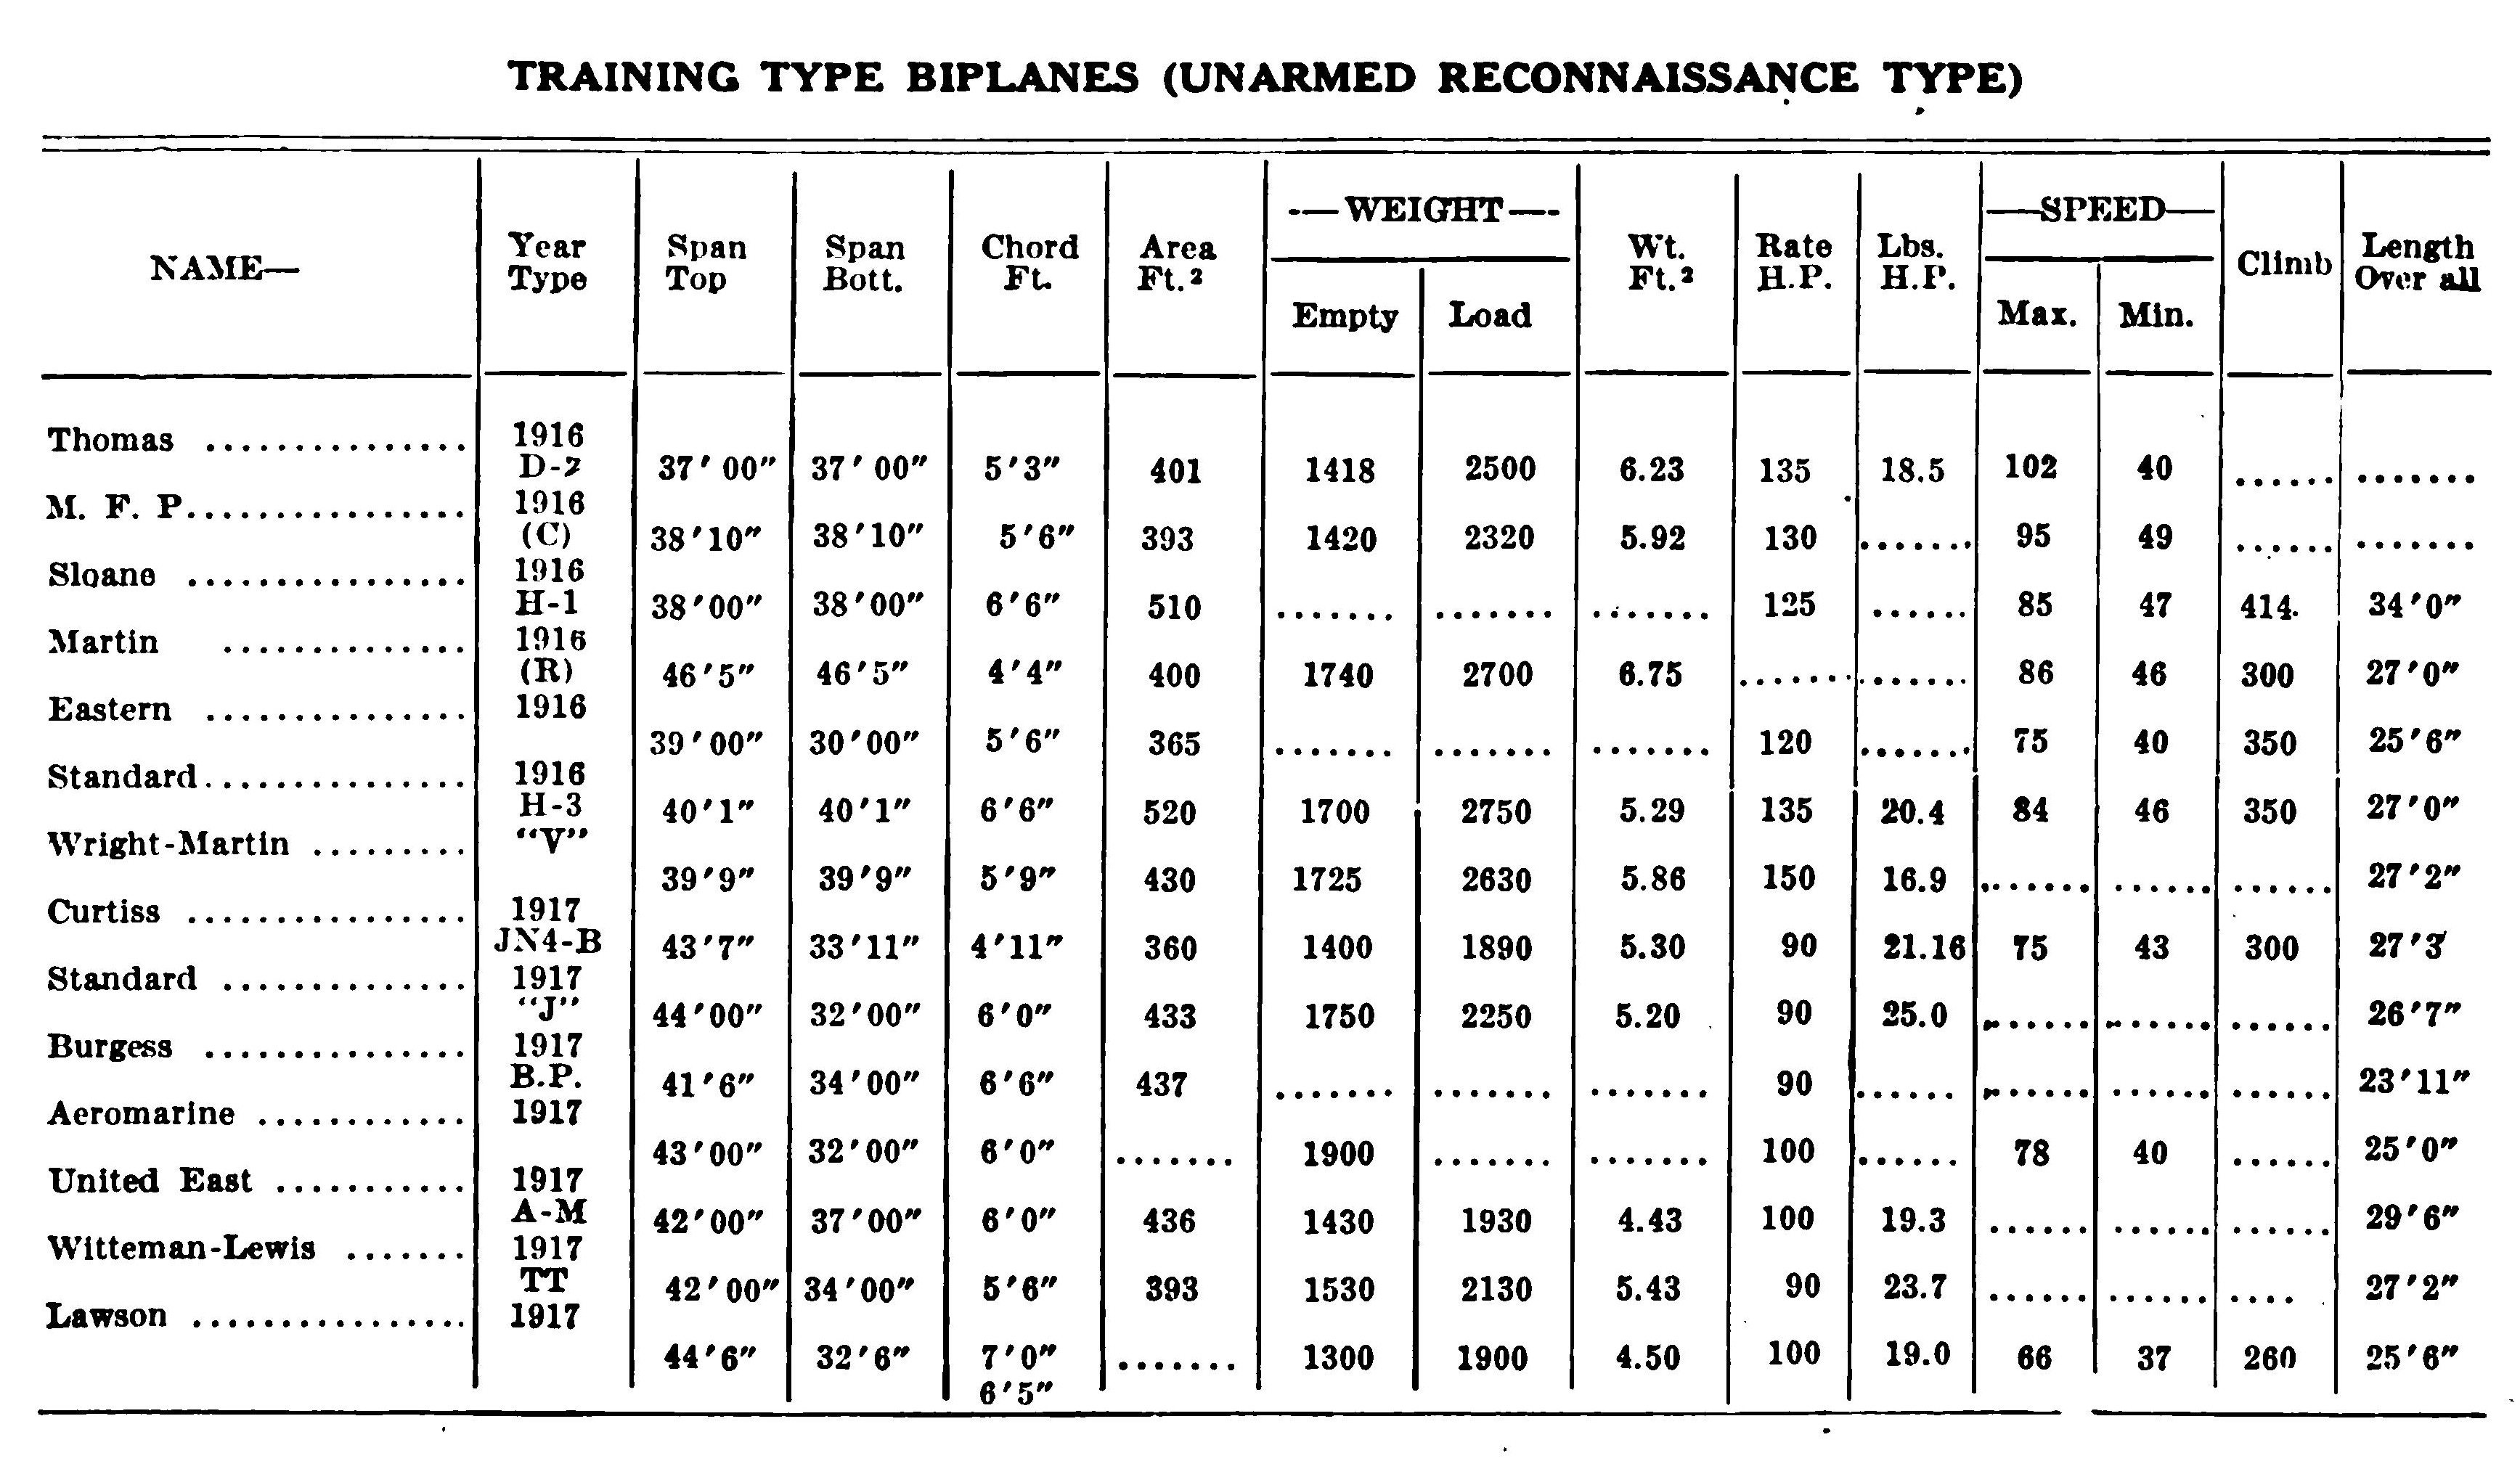 Table of Training Type Biplanes (Unarmed Reconnaissance Type)